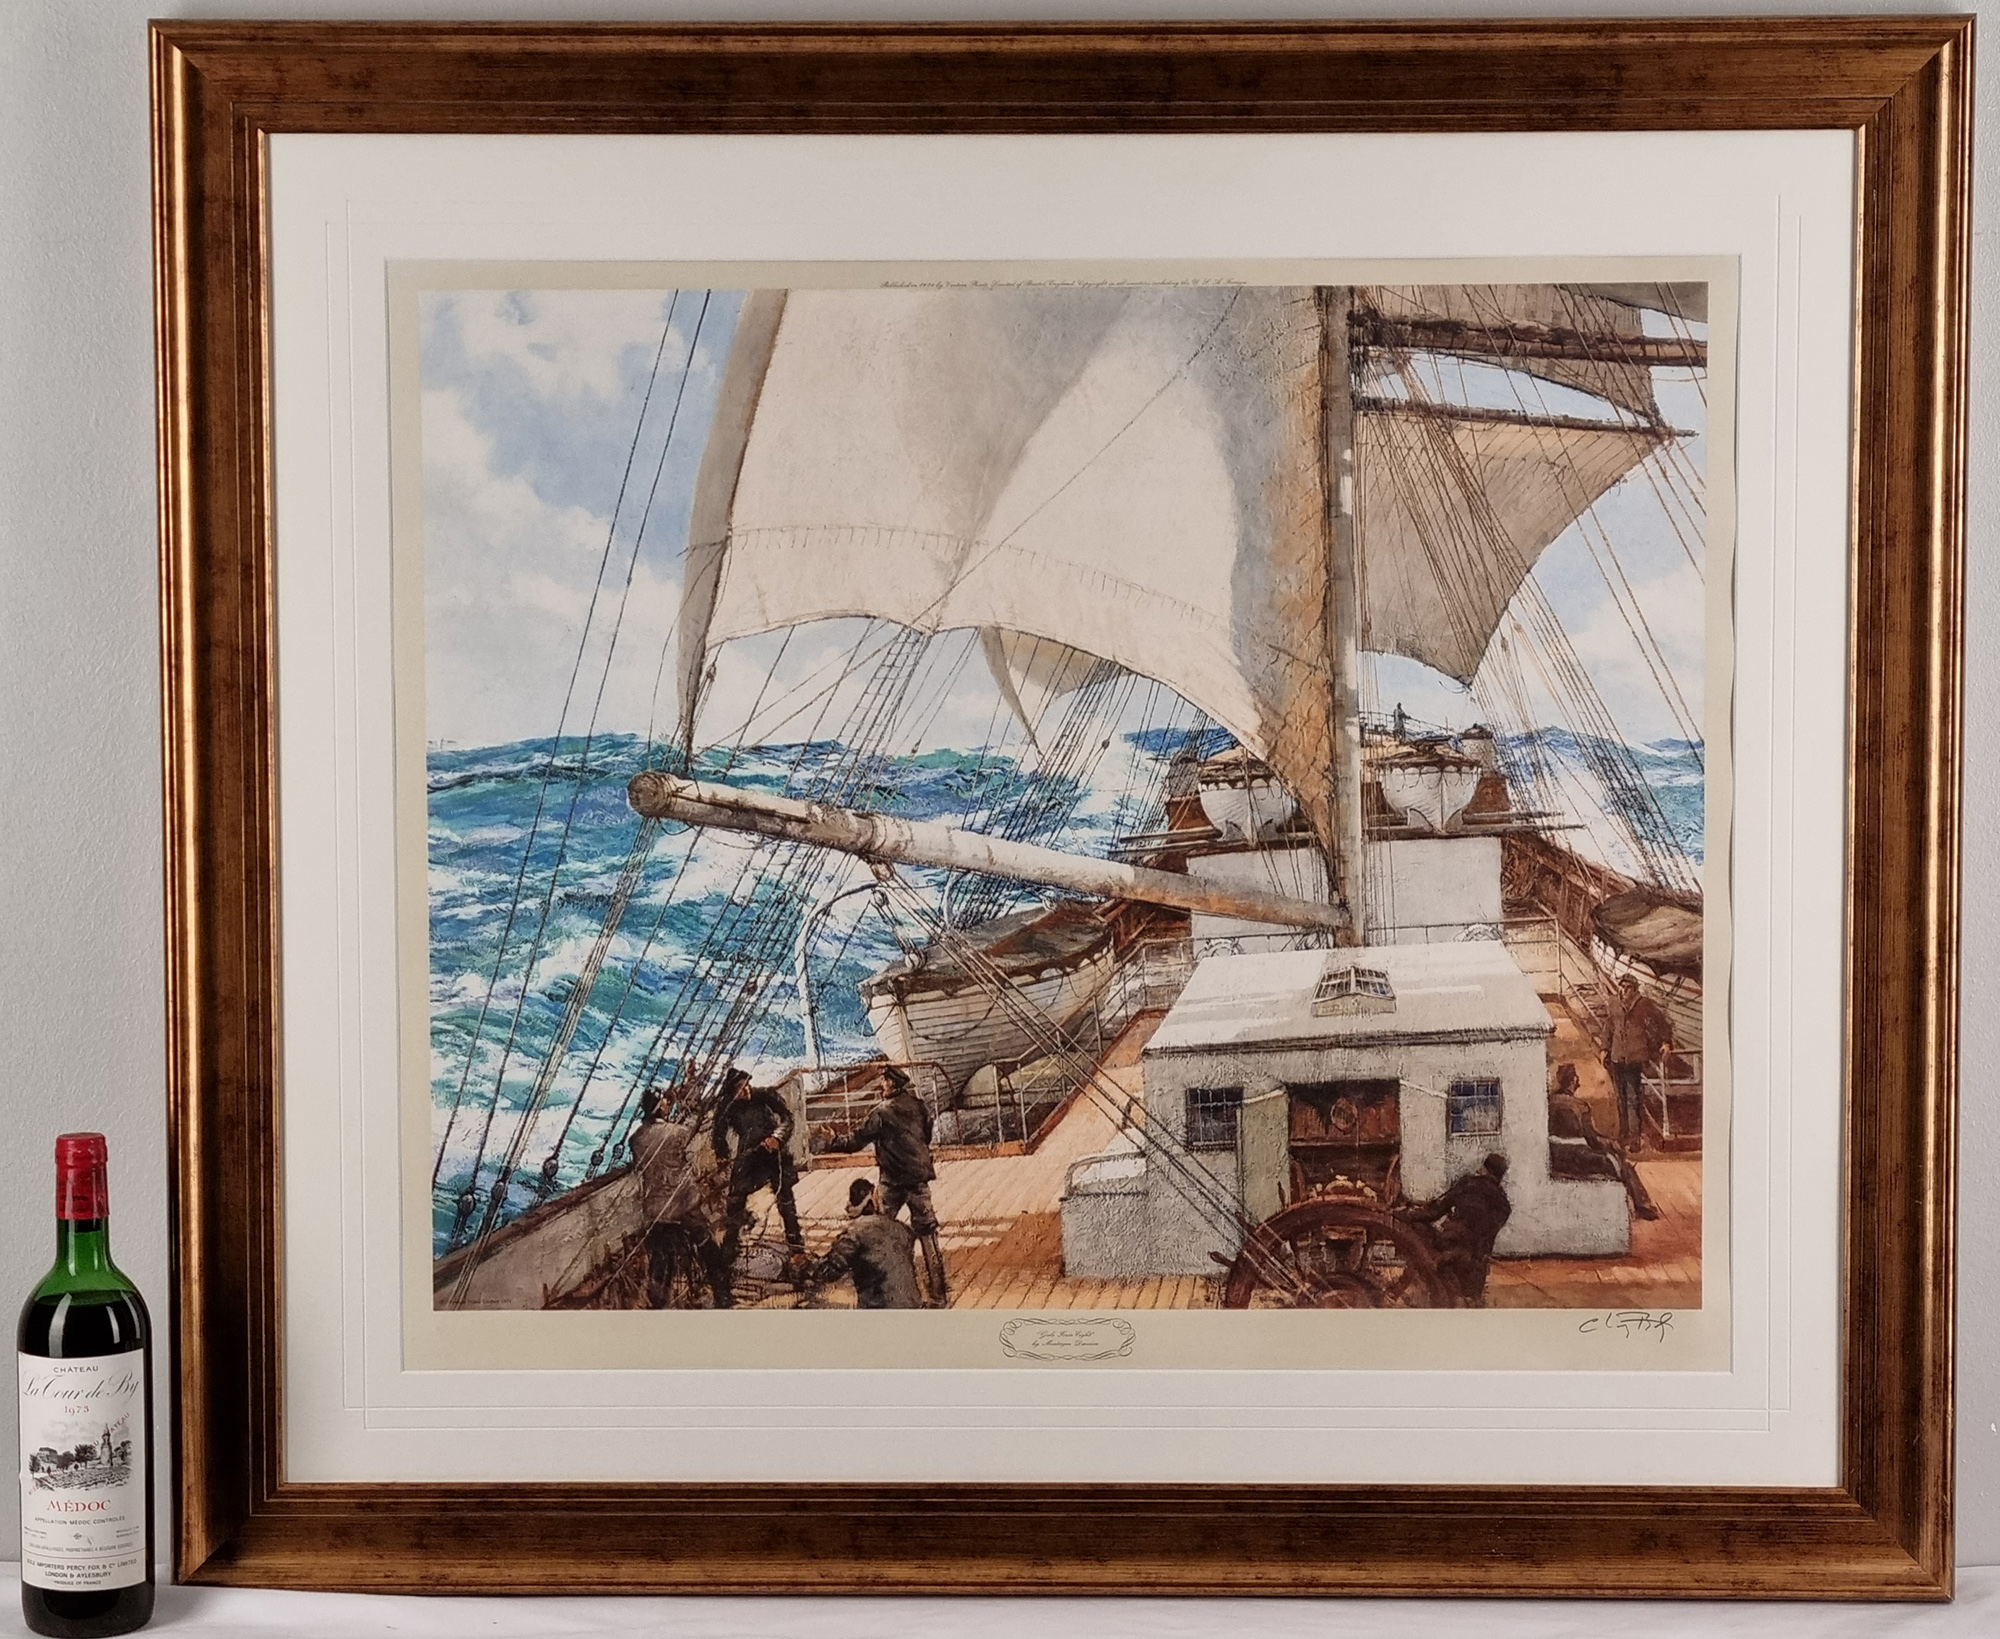 Rare Limited Edition by the Late Montague Dawson - Image 7 of 7